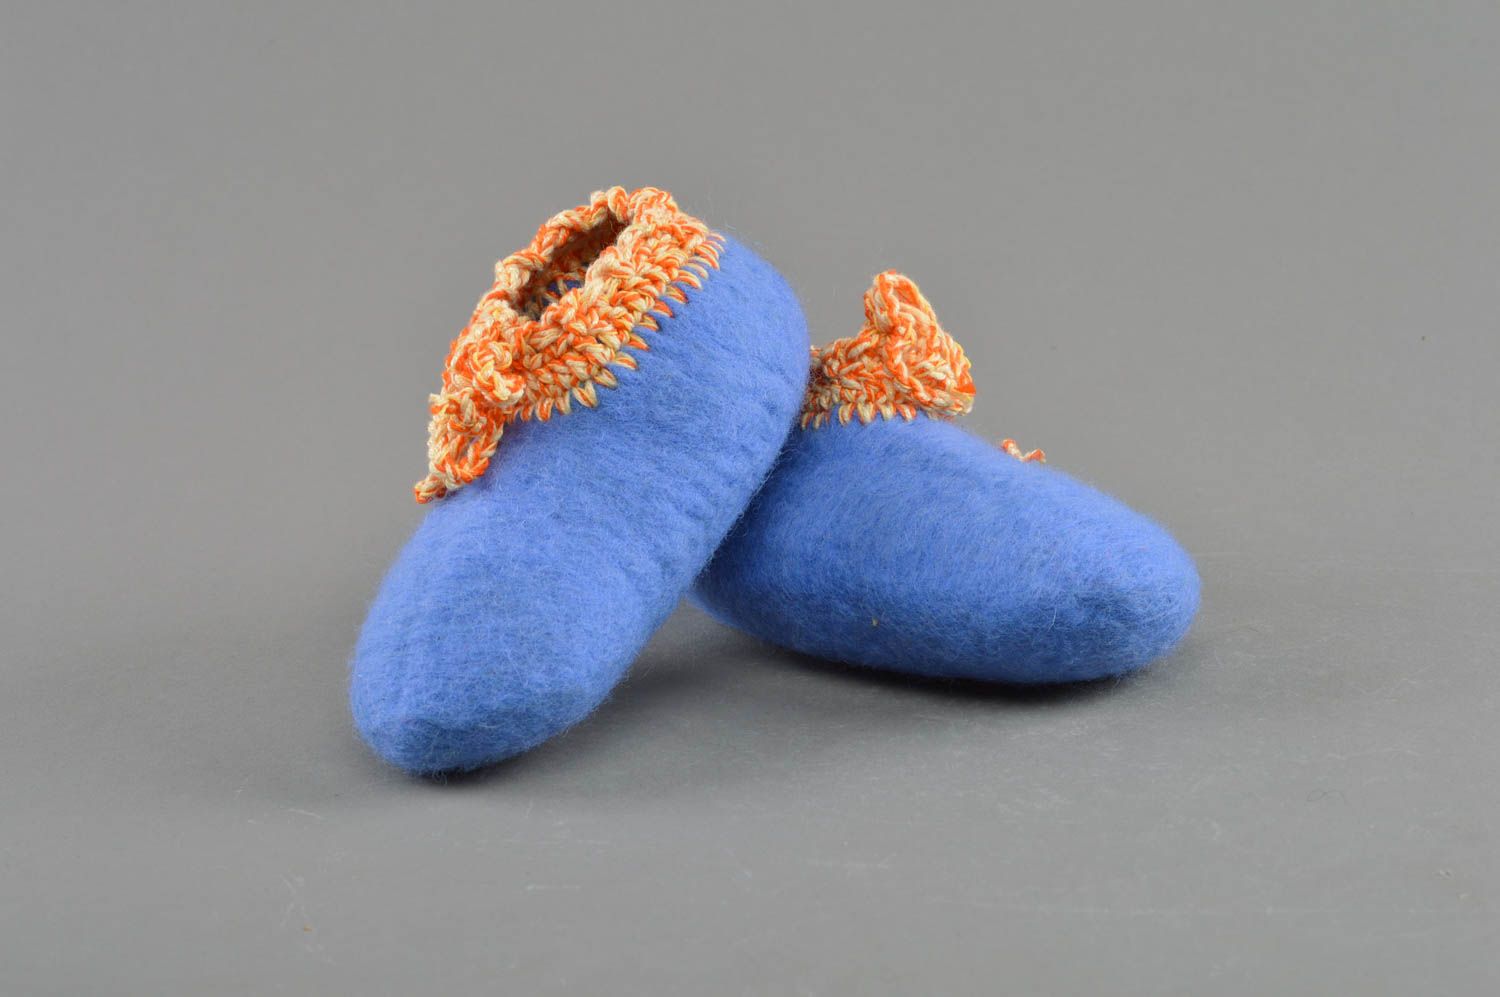 Handmade bright blue felted woolen baby booties with crocheted over edges photo 1